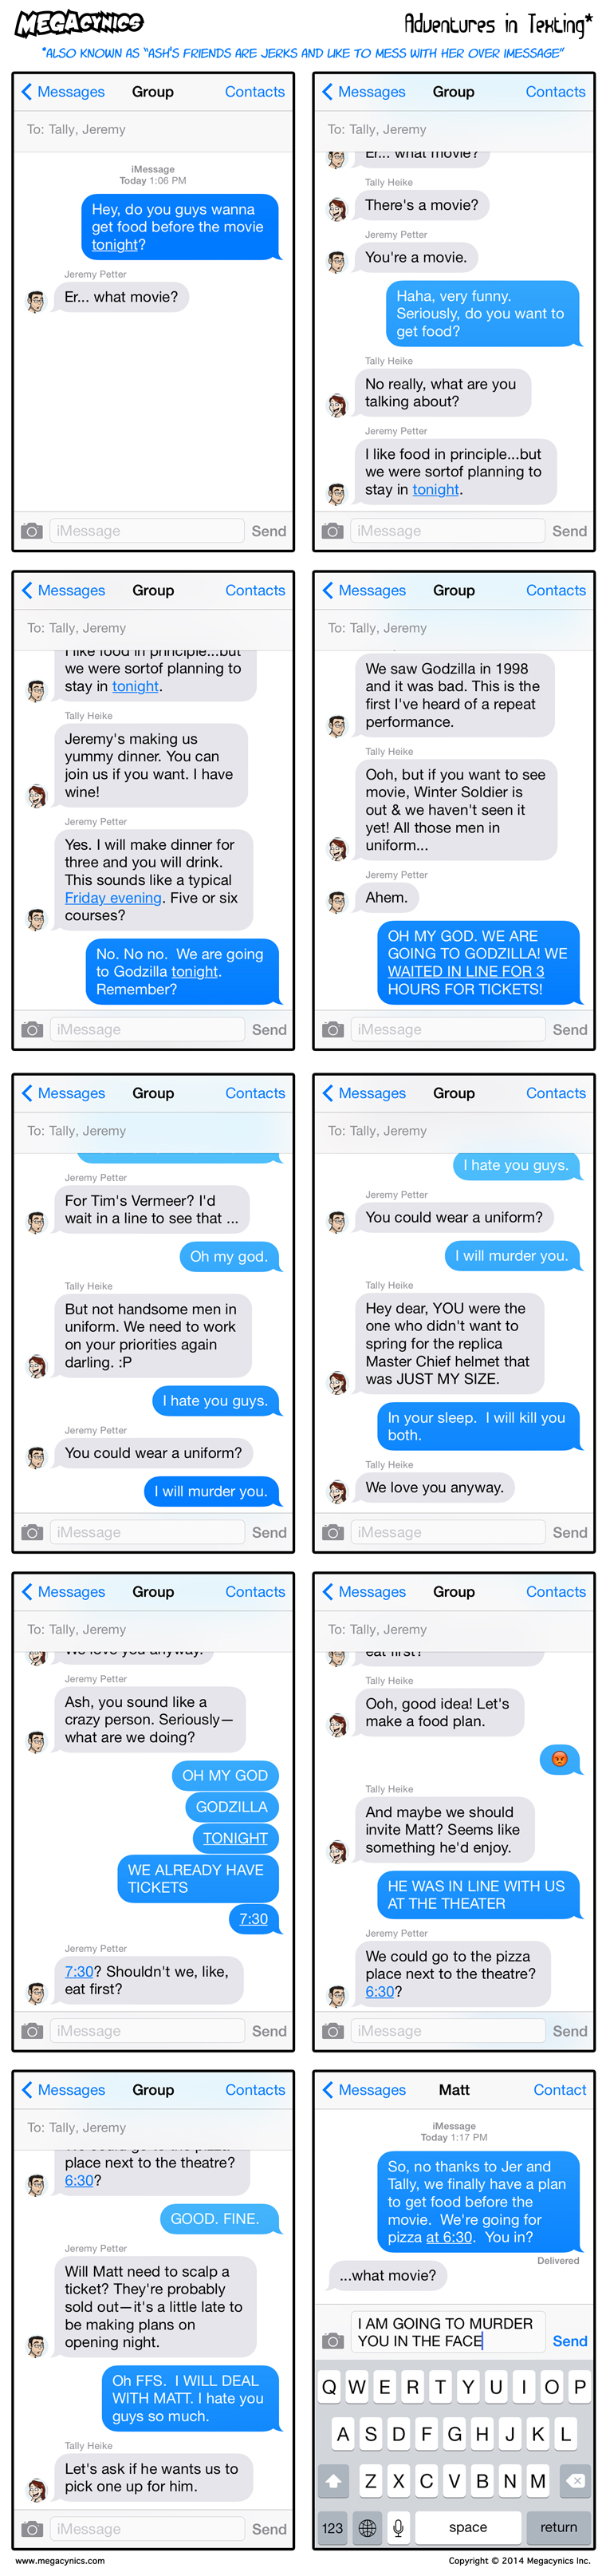 MegaCynics: Adventures in Texting (May 16, 2014)